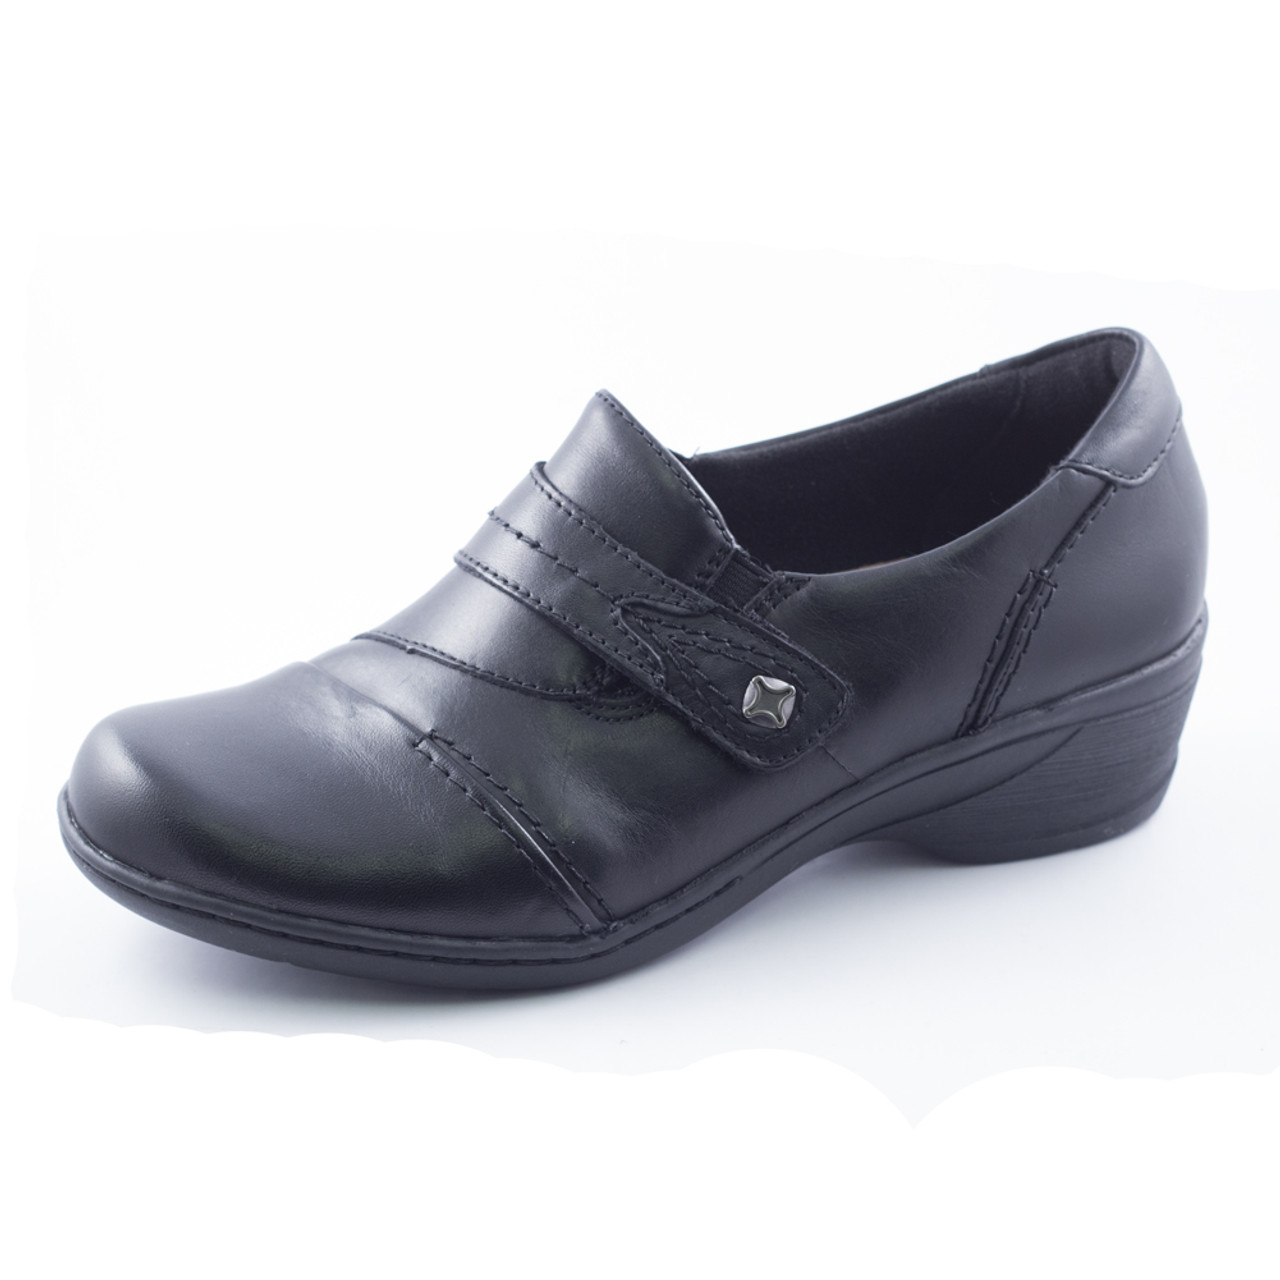 Earth Origins Fiona - Stylish and Comfortable Women's Shoes for Everyday  Wear(size 6) 